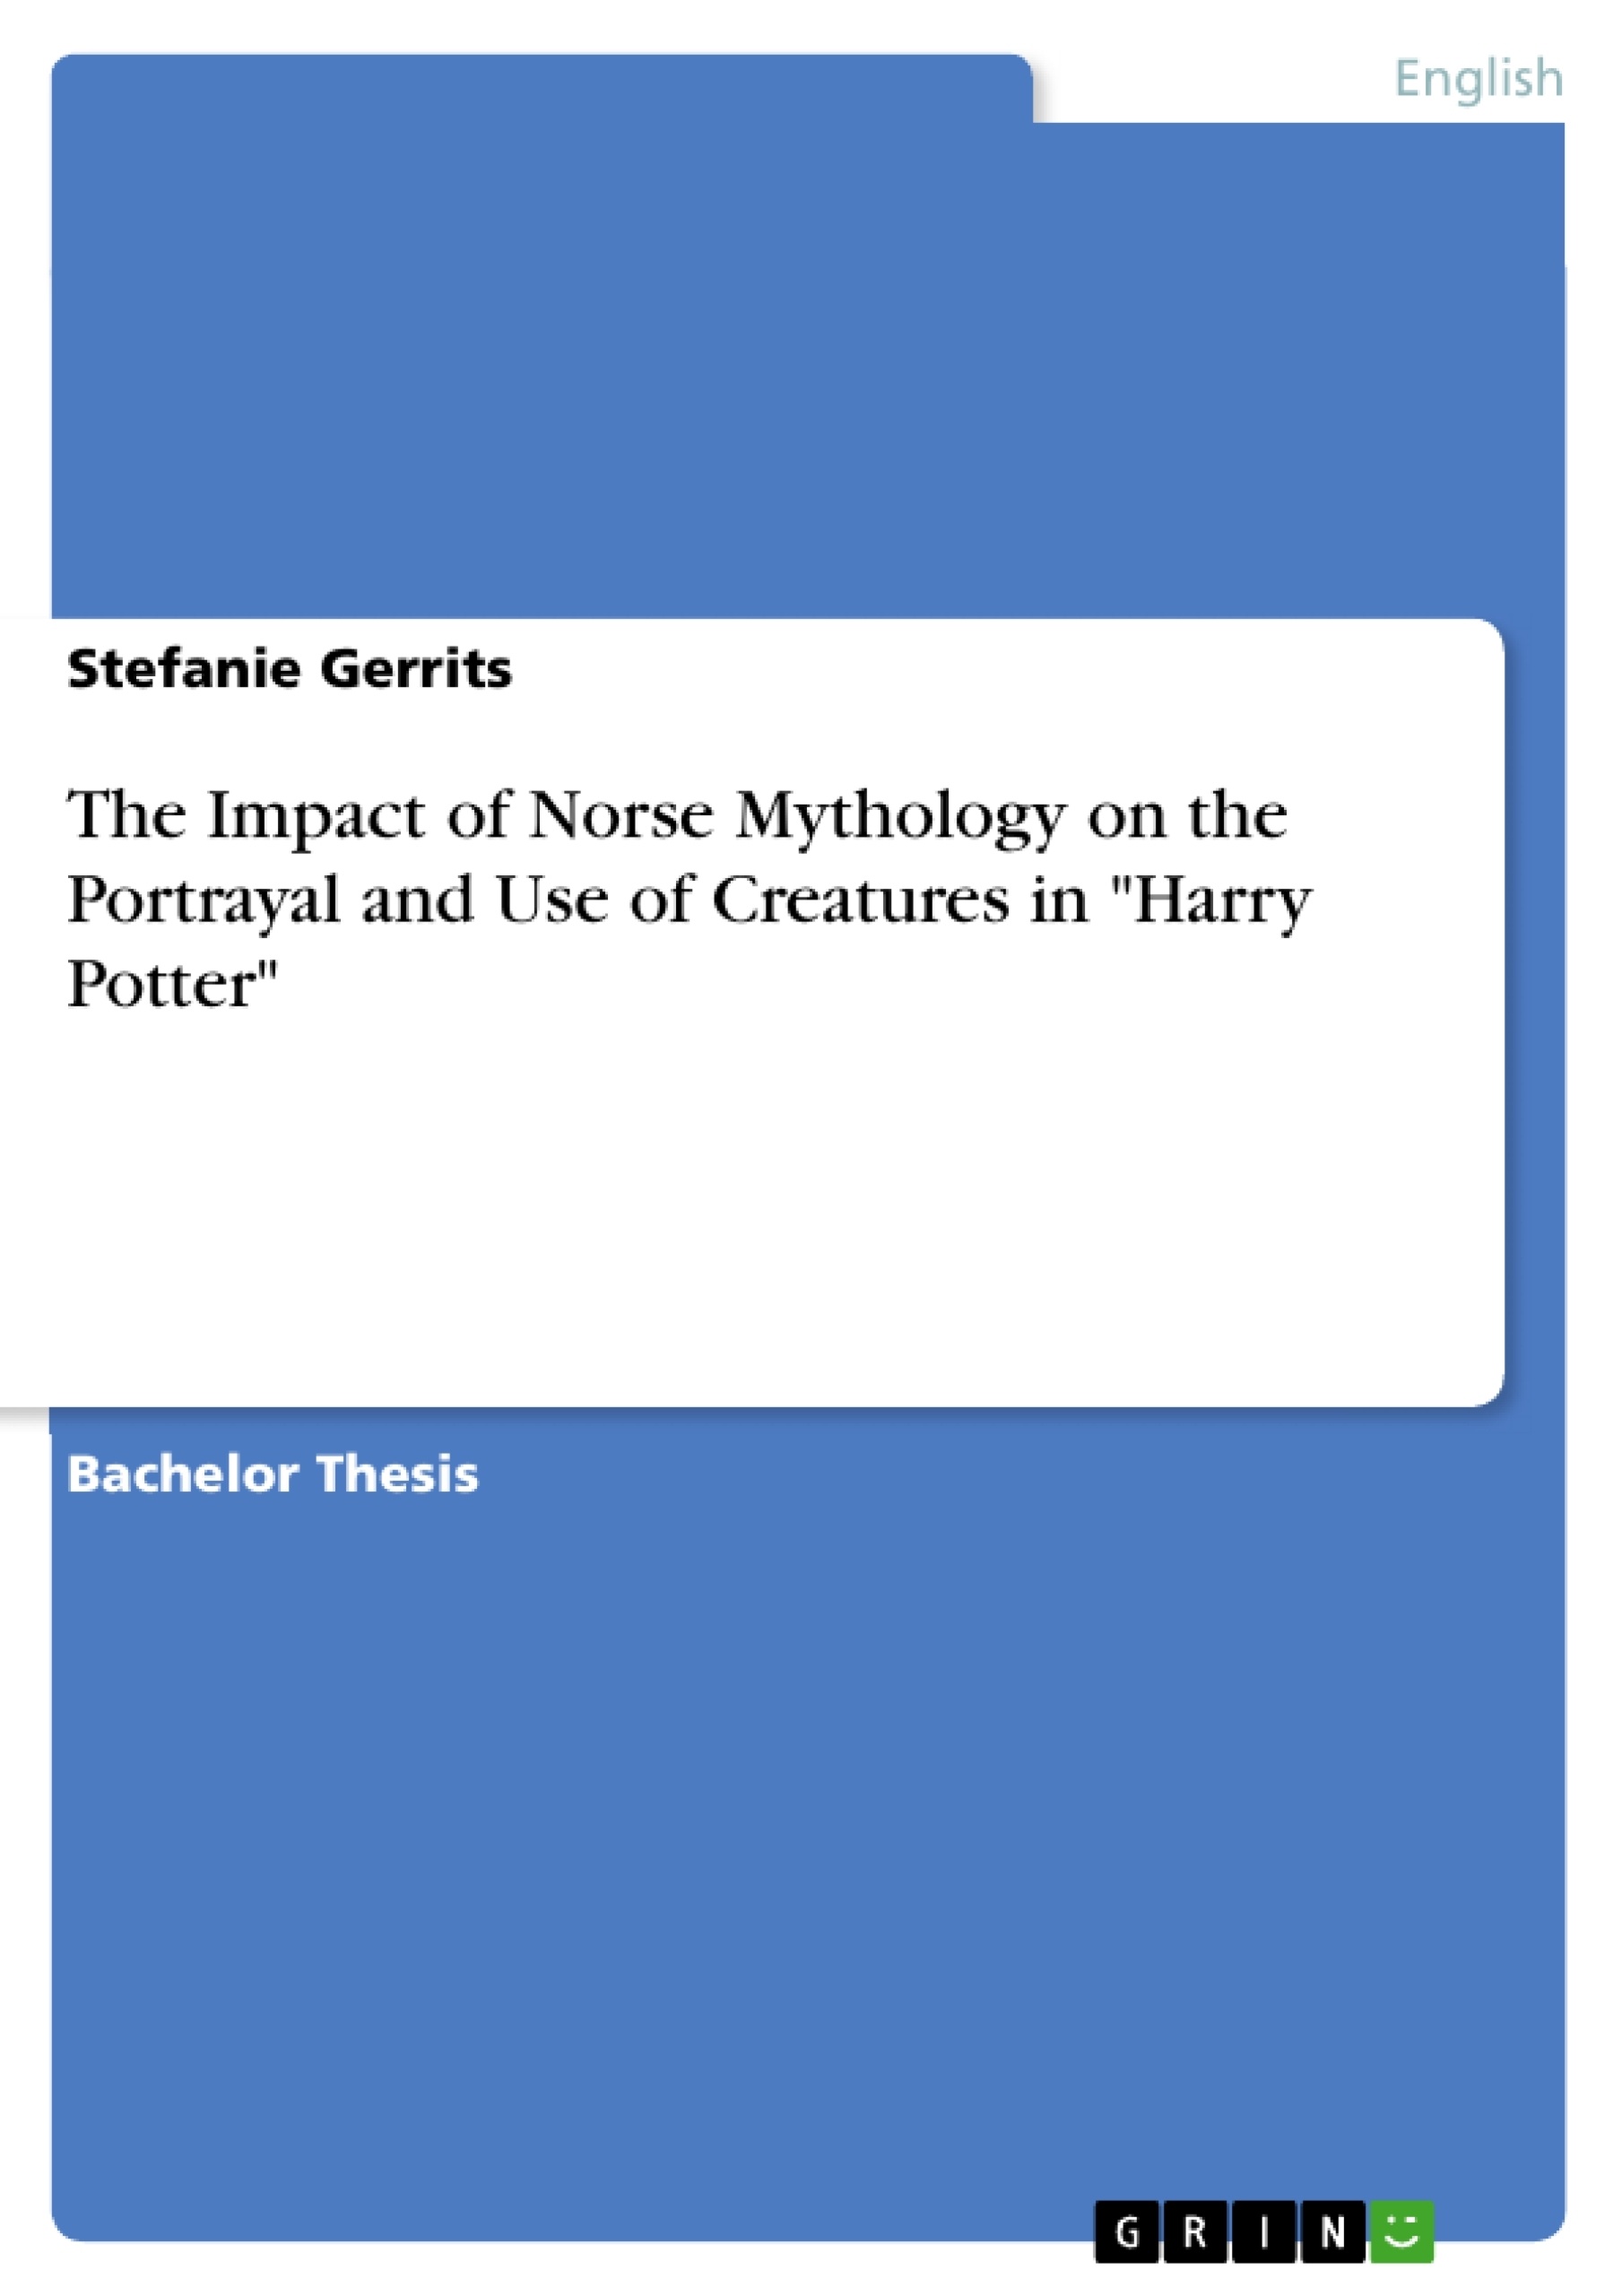 Title: The Impact of Norse Mythology on the Portrayal and Use of Creatures in "Harry Potter"